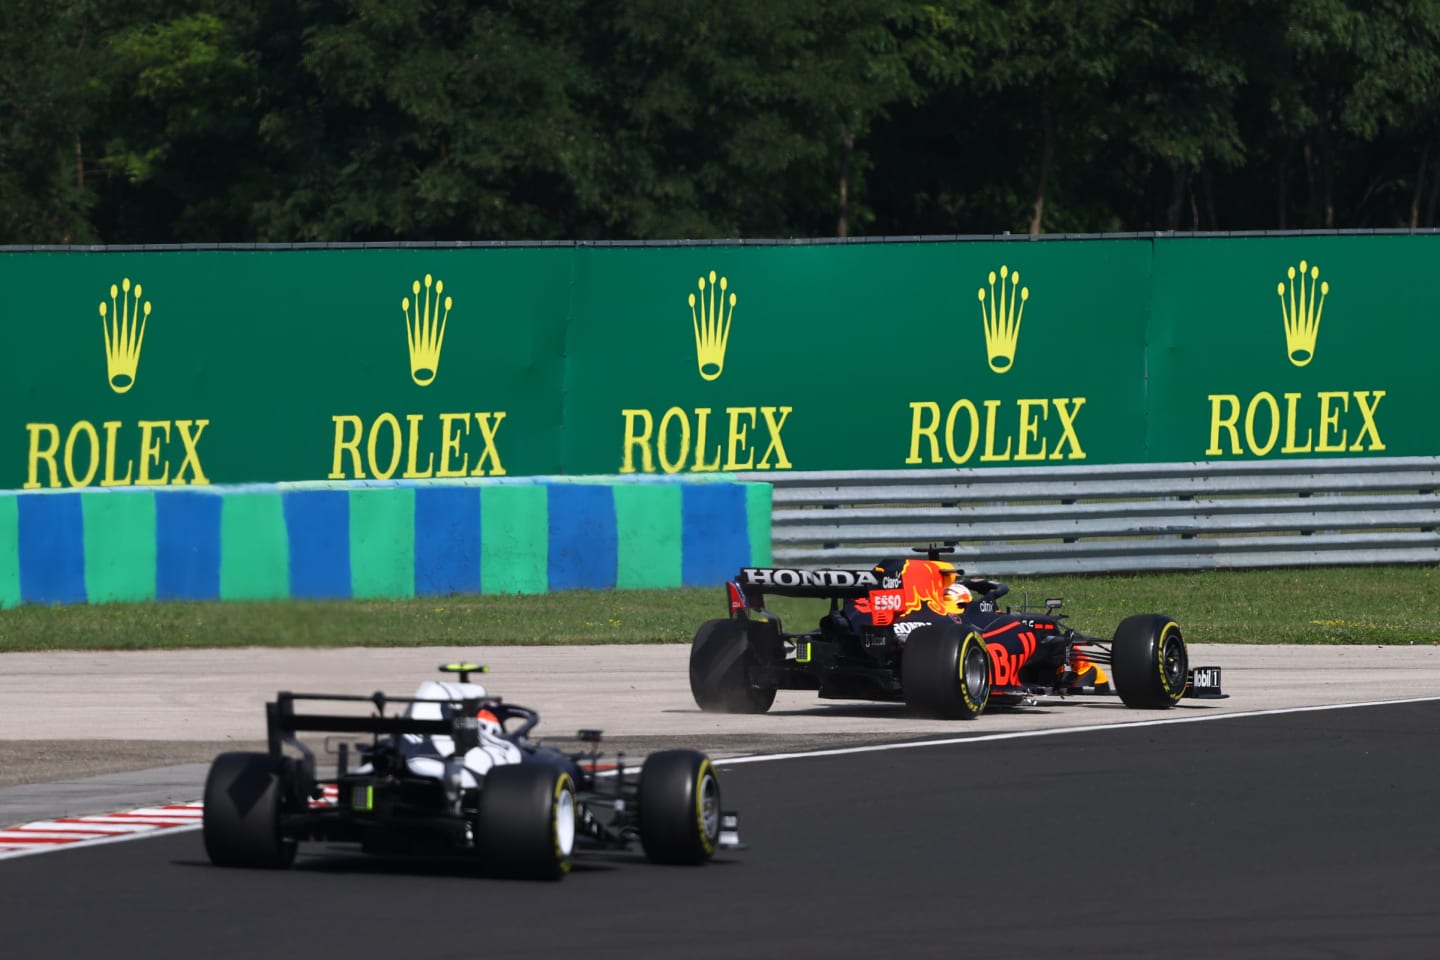 BUDAPEST, HUNGARY - AUGUST 01: Max Verstappen of the Netherlands driving the (33) Red Bull Racing RB16B Honda runs wide during the F1 Grand Prix of Hungary at Hungaroring on August 01, 2021 in Budapest, Hungary. (Photo by Bryn Lennon/Getty Images)